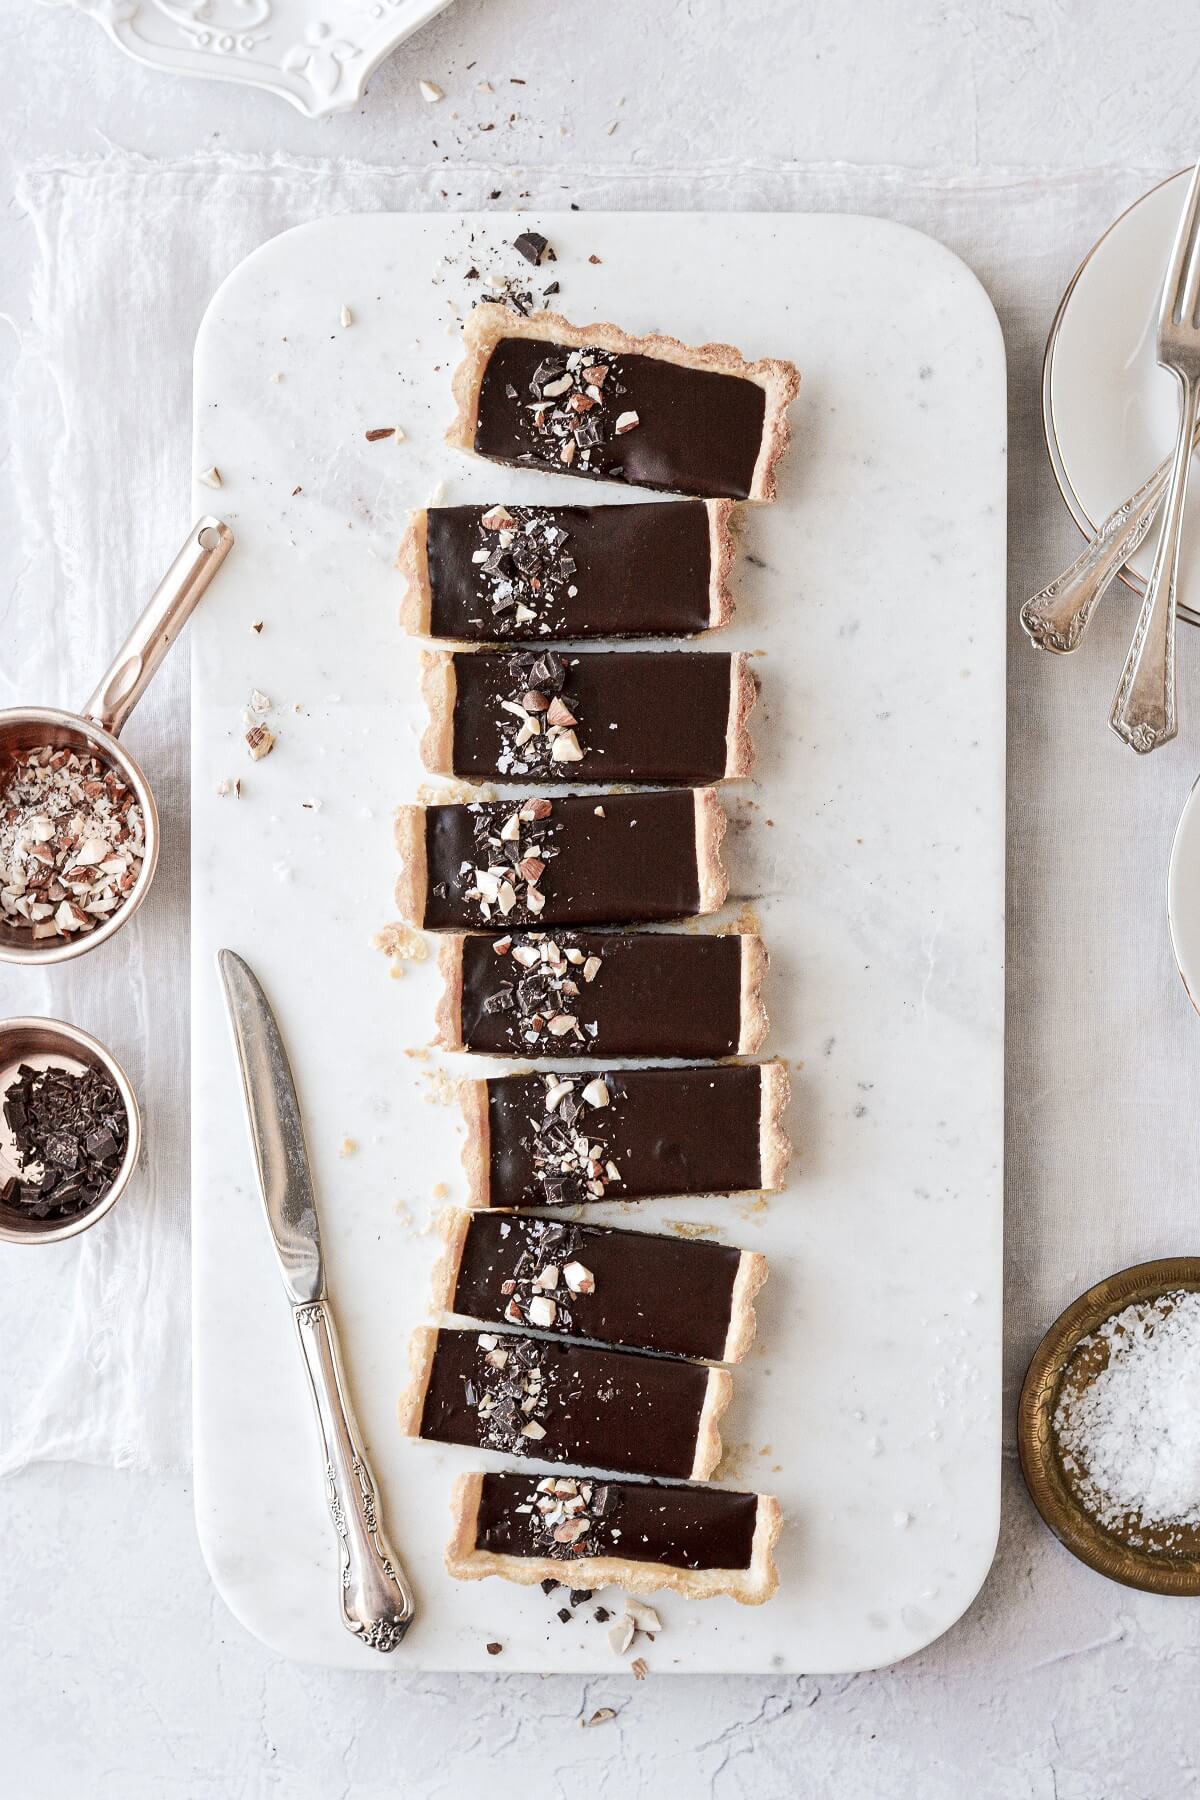 Slices of chocolate almond tart, arranged on a marble serving board.